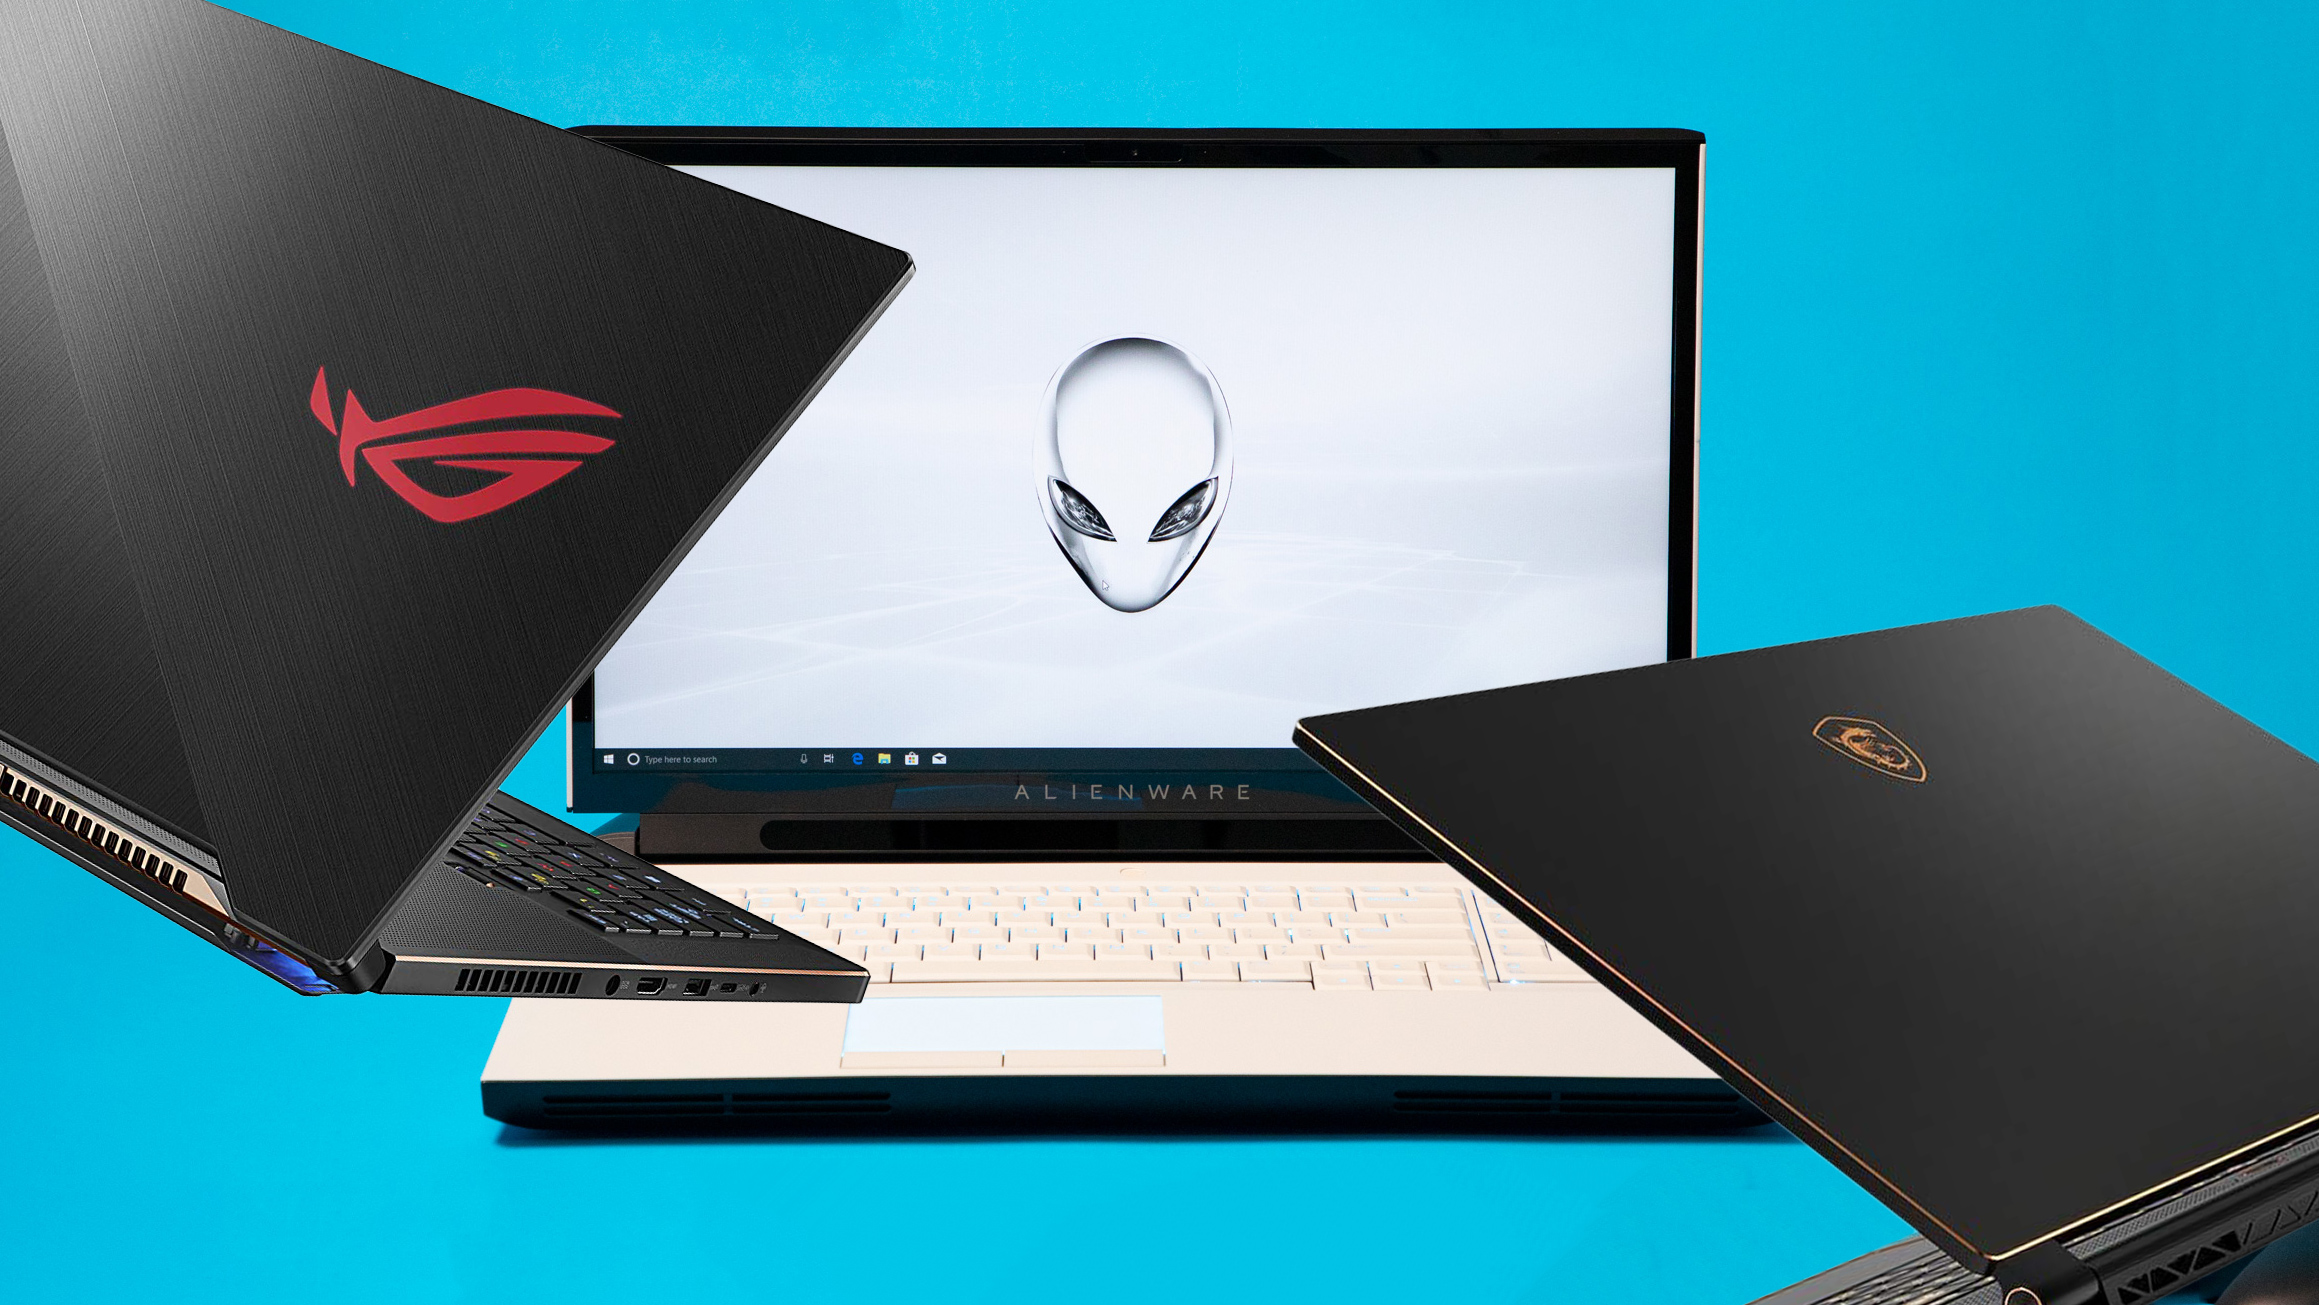 The best gaming laptops in 2021